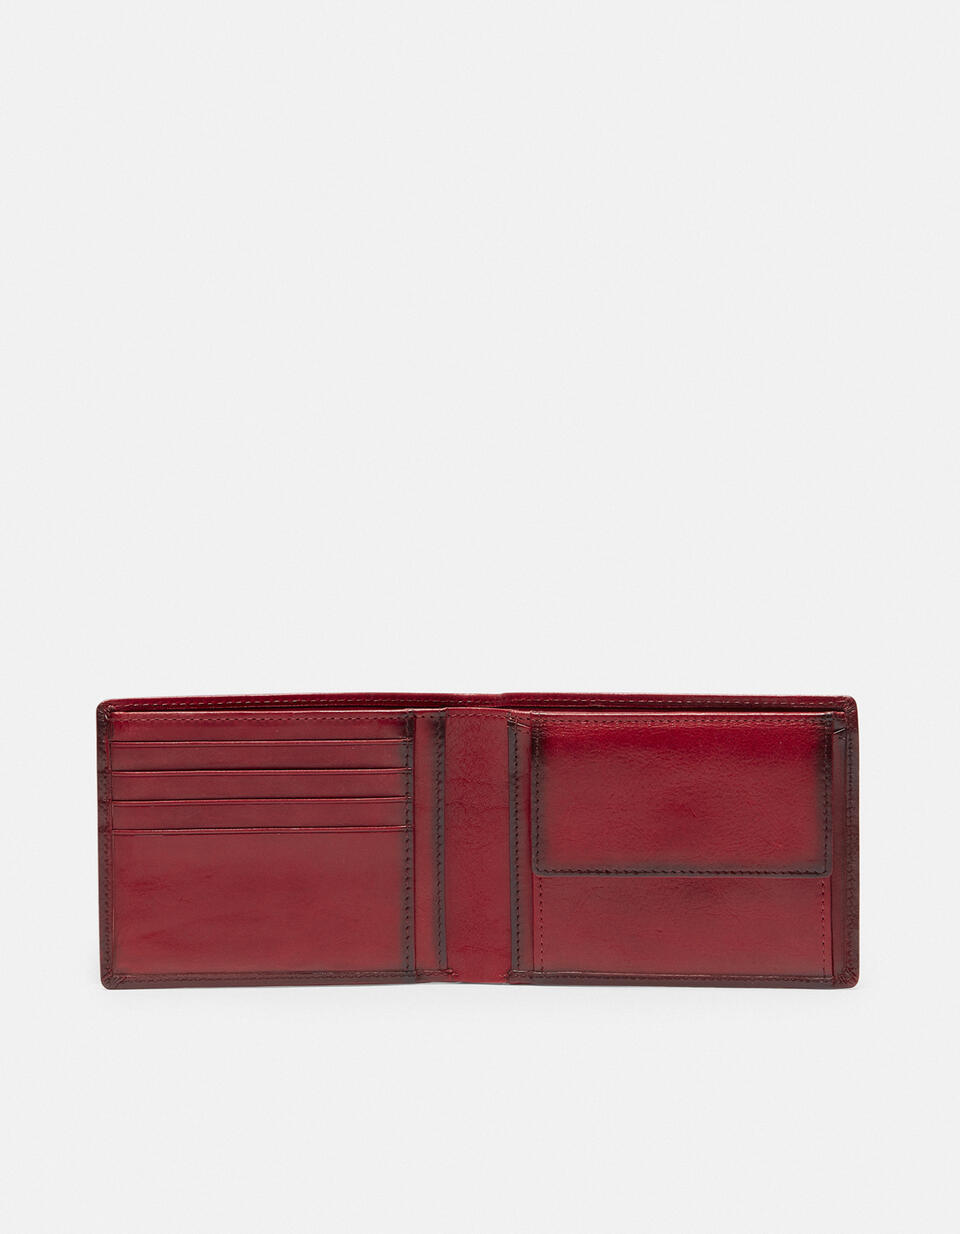 Anti-rfid Warm and Color wallet with leather coin case - Women's Wallets - Men's Wallets | Wallets ROSSO - Women's Wallets - Men's Wallets | WalletsCuoieria Fiorentina